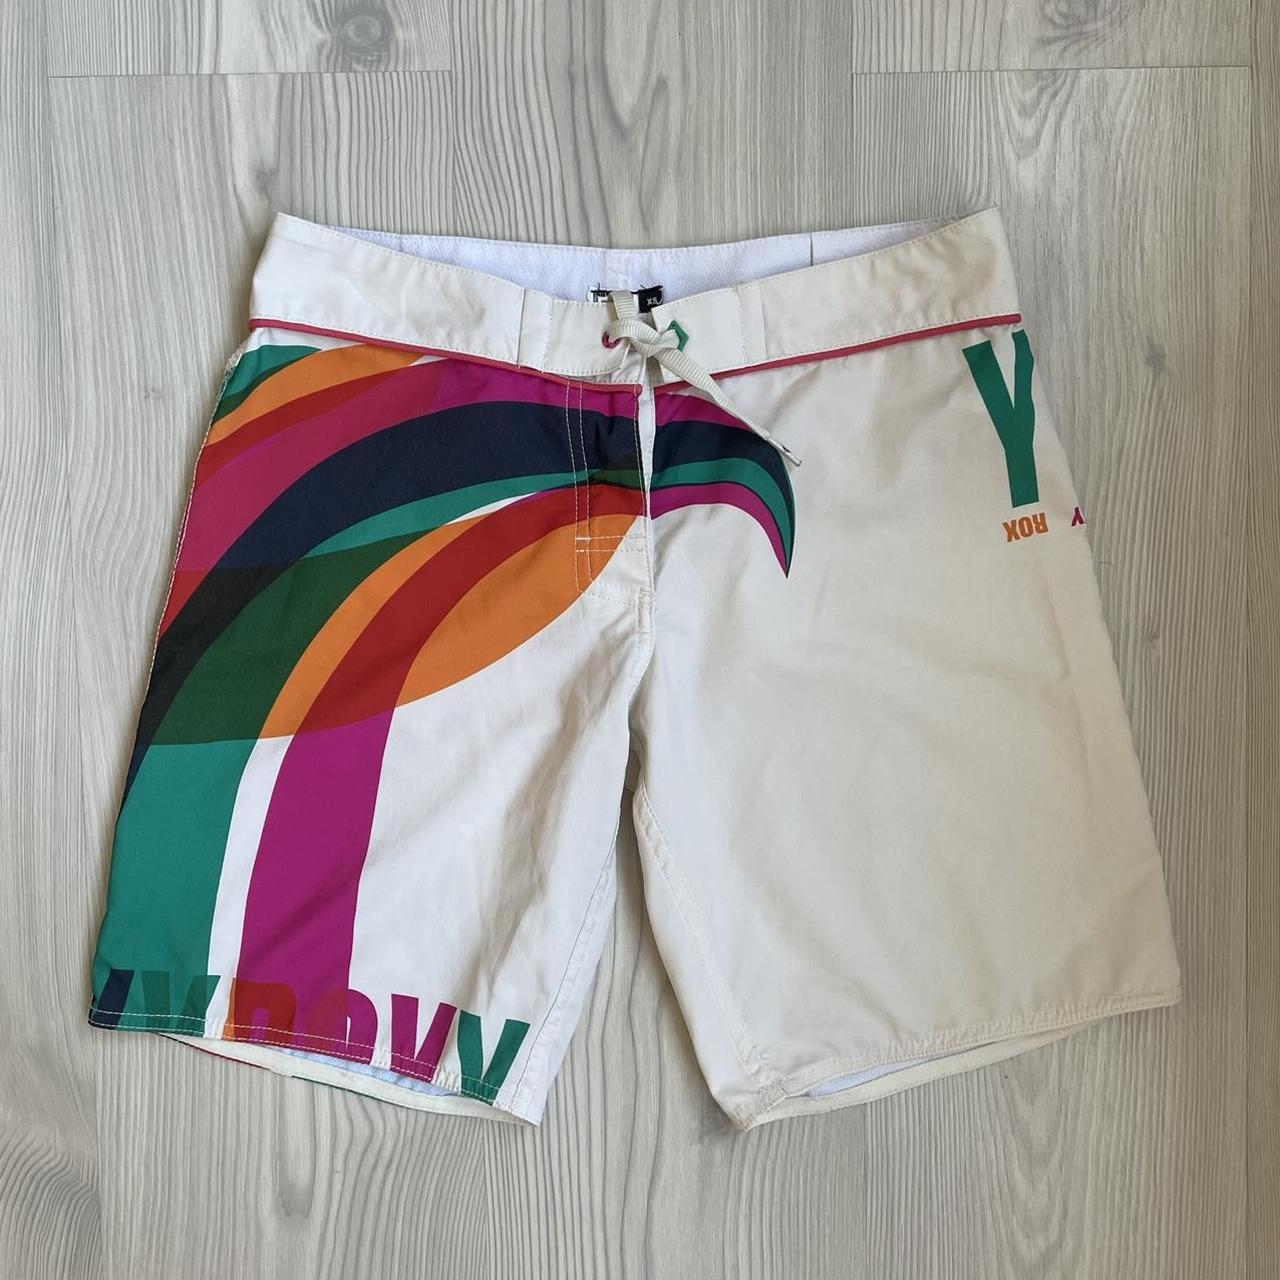 Product Image 1 - insane y2k roxy shorts
perfect condition
xs